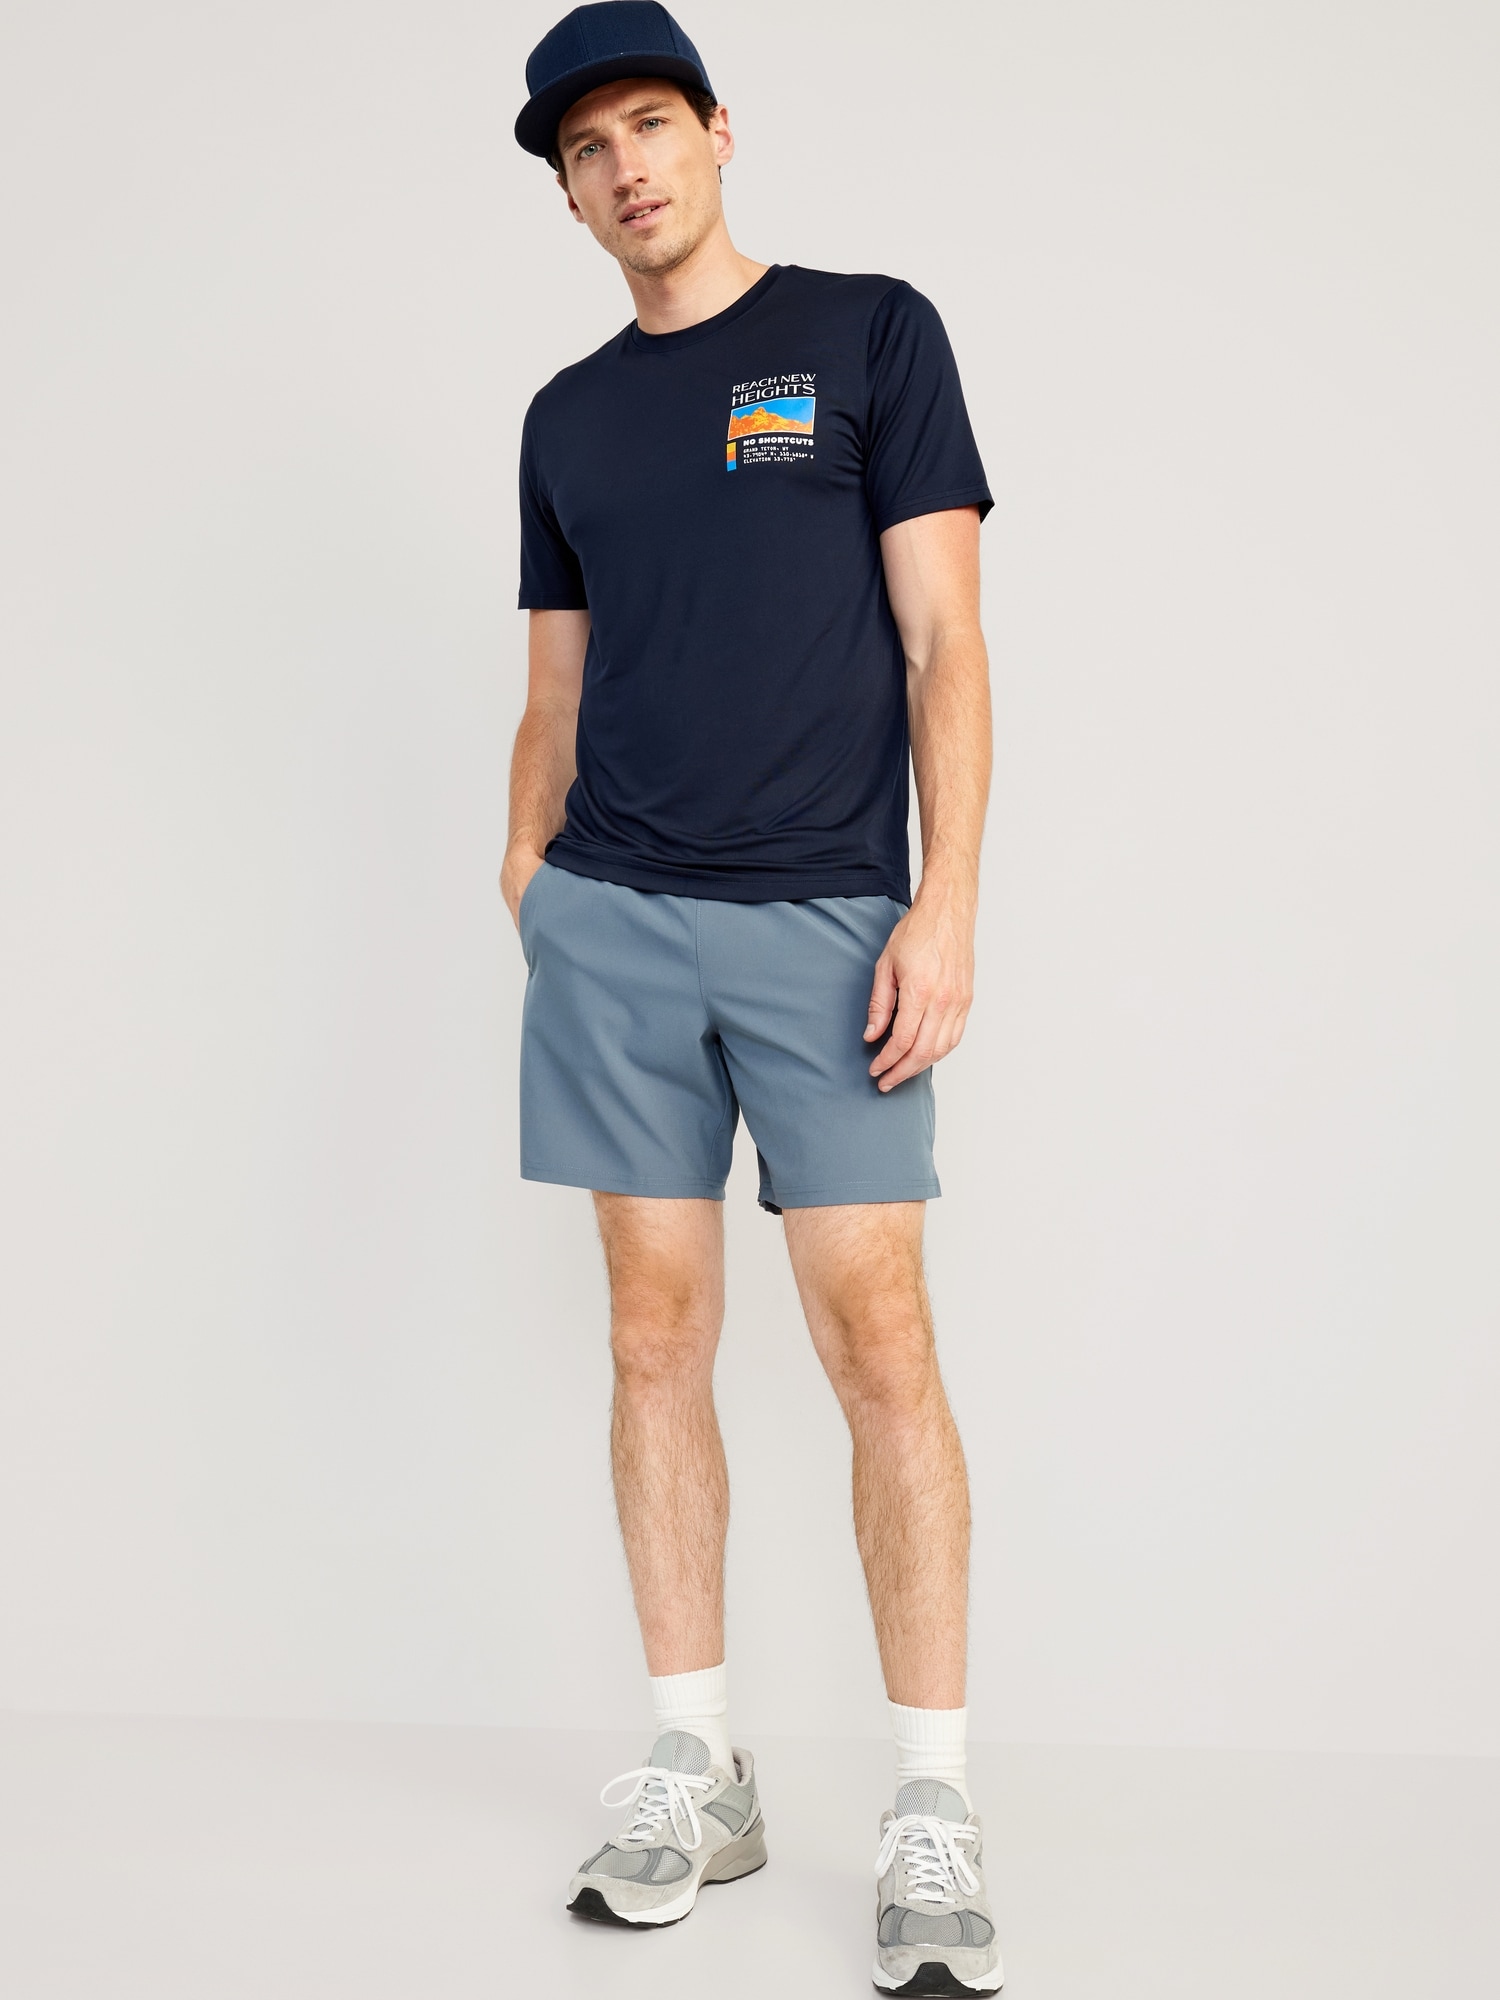 Cloud 94 Soft Graphic T-Shirt for Men | Old Navy